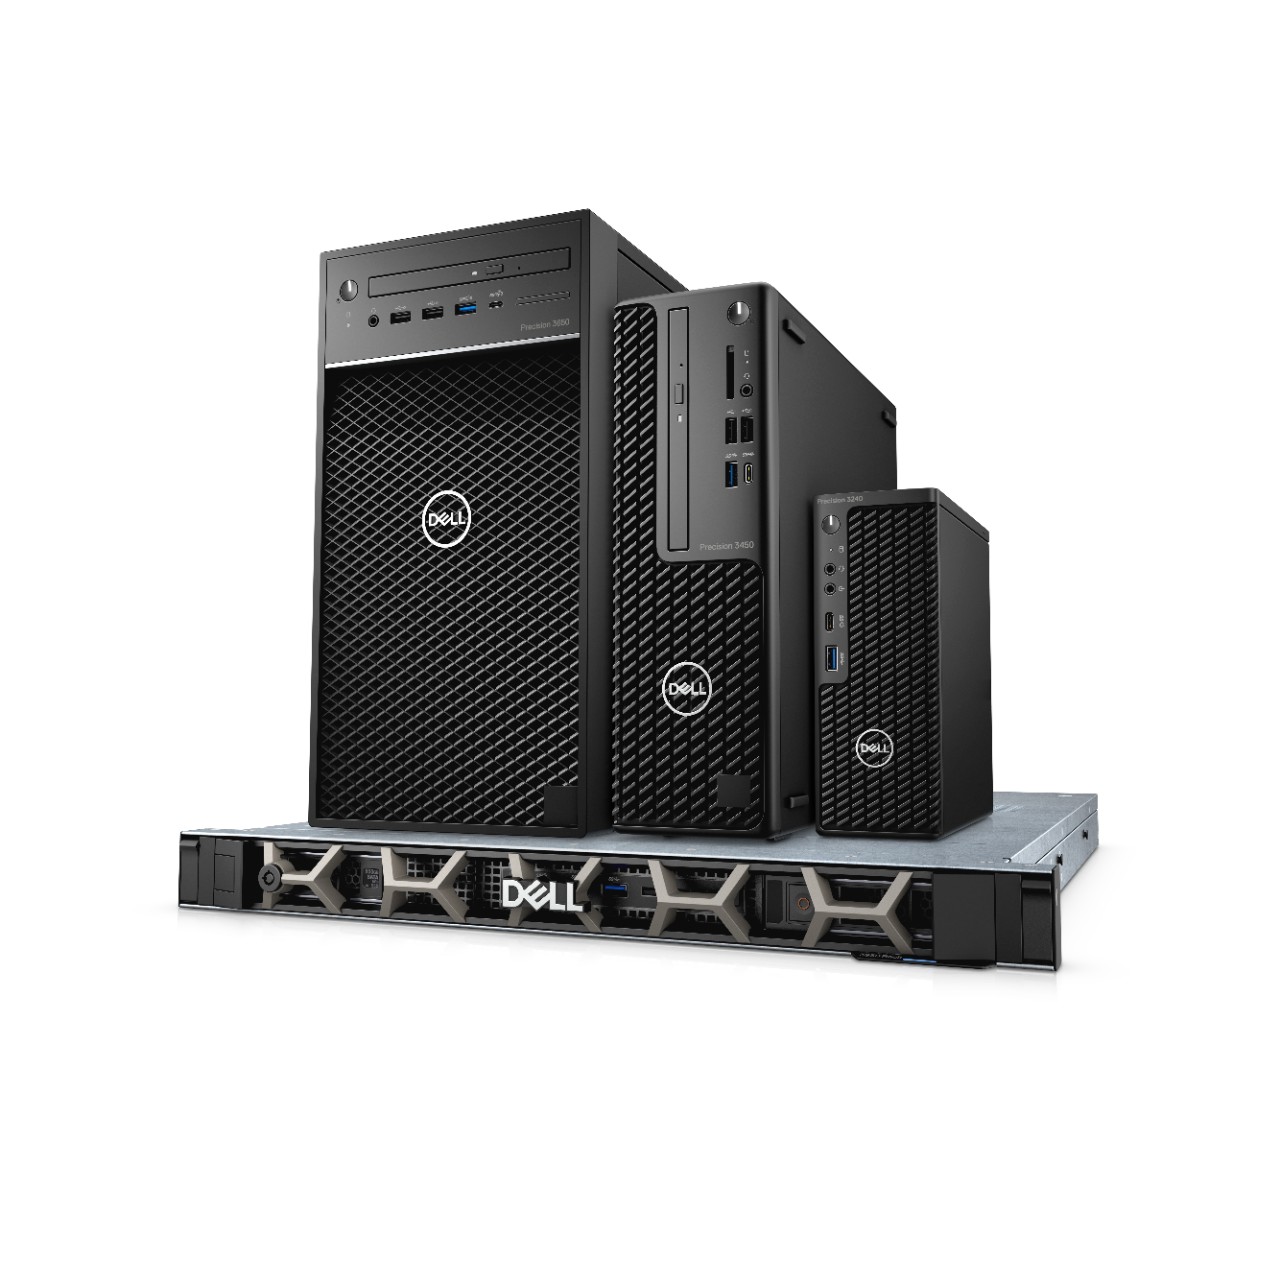 Dell launches Precision 3450 Small Form Factor and Precision 3650 Tower  workstations | Windows Experience Blog